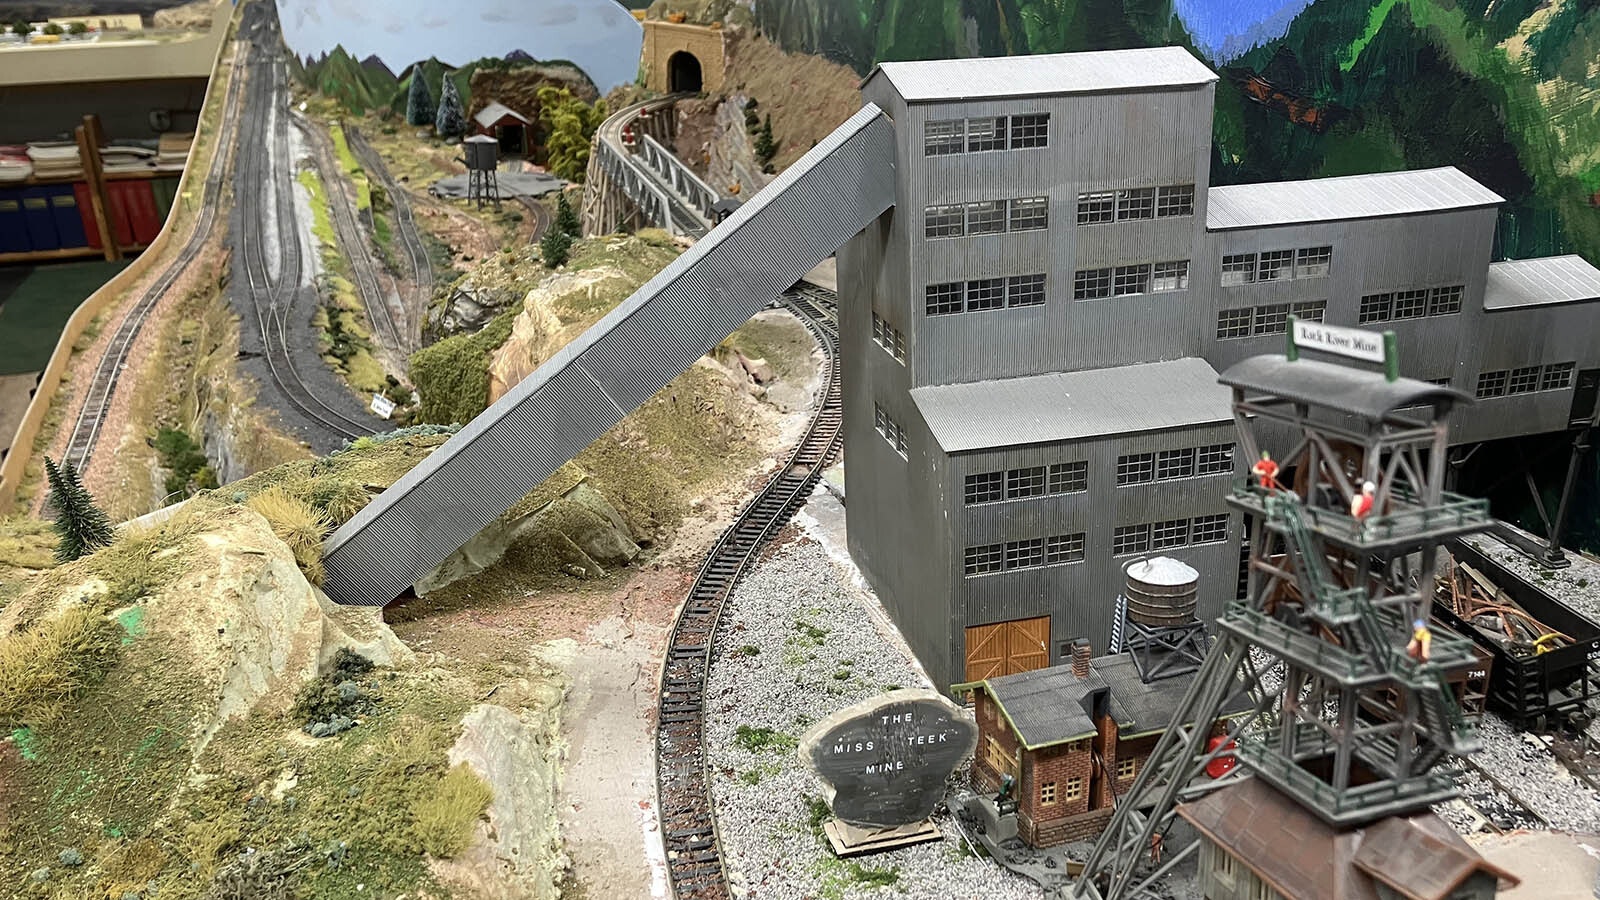 A mine scene is just one of many created by the group to make model railroading more realistic and fun.